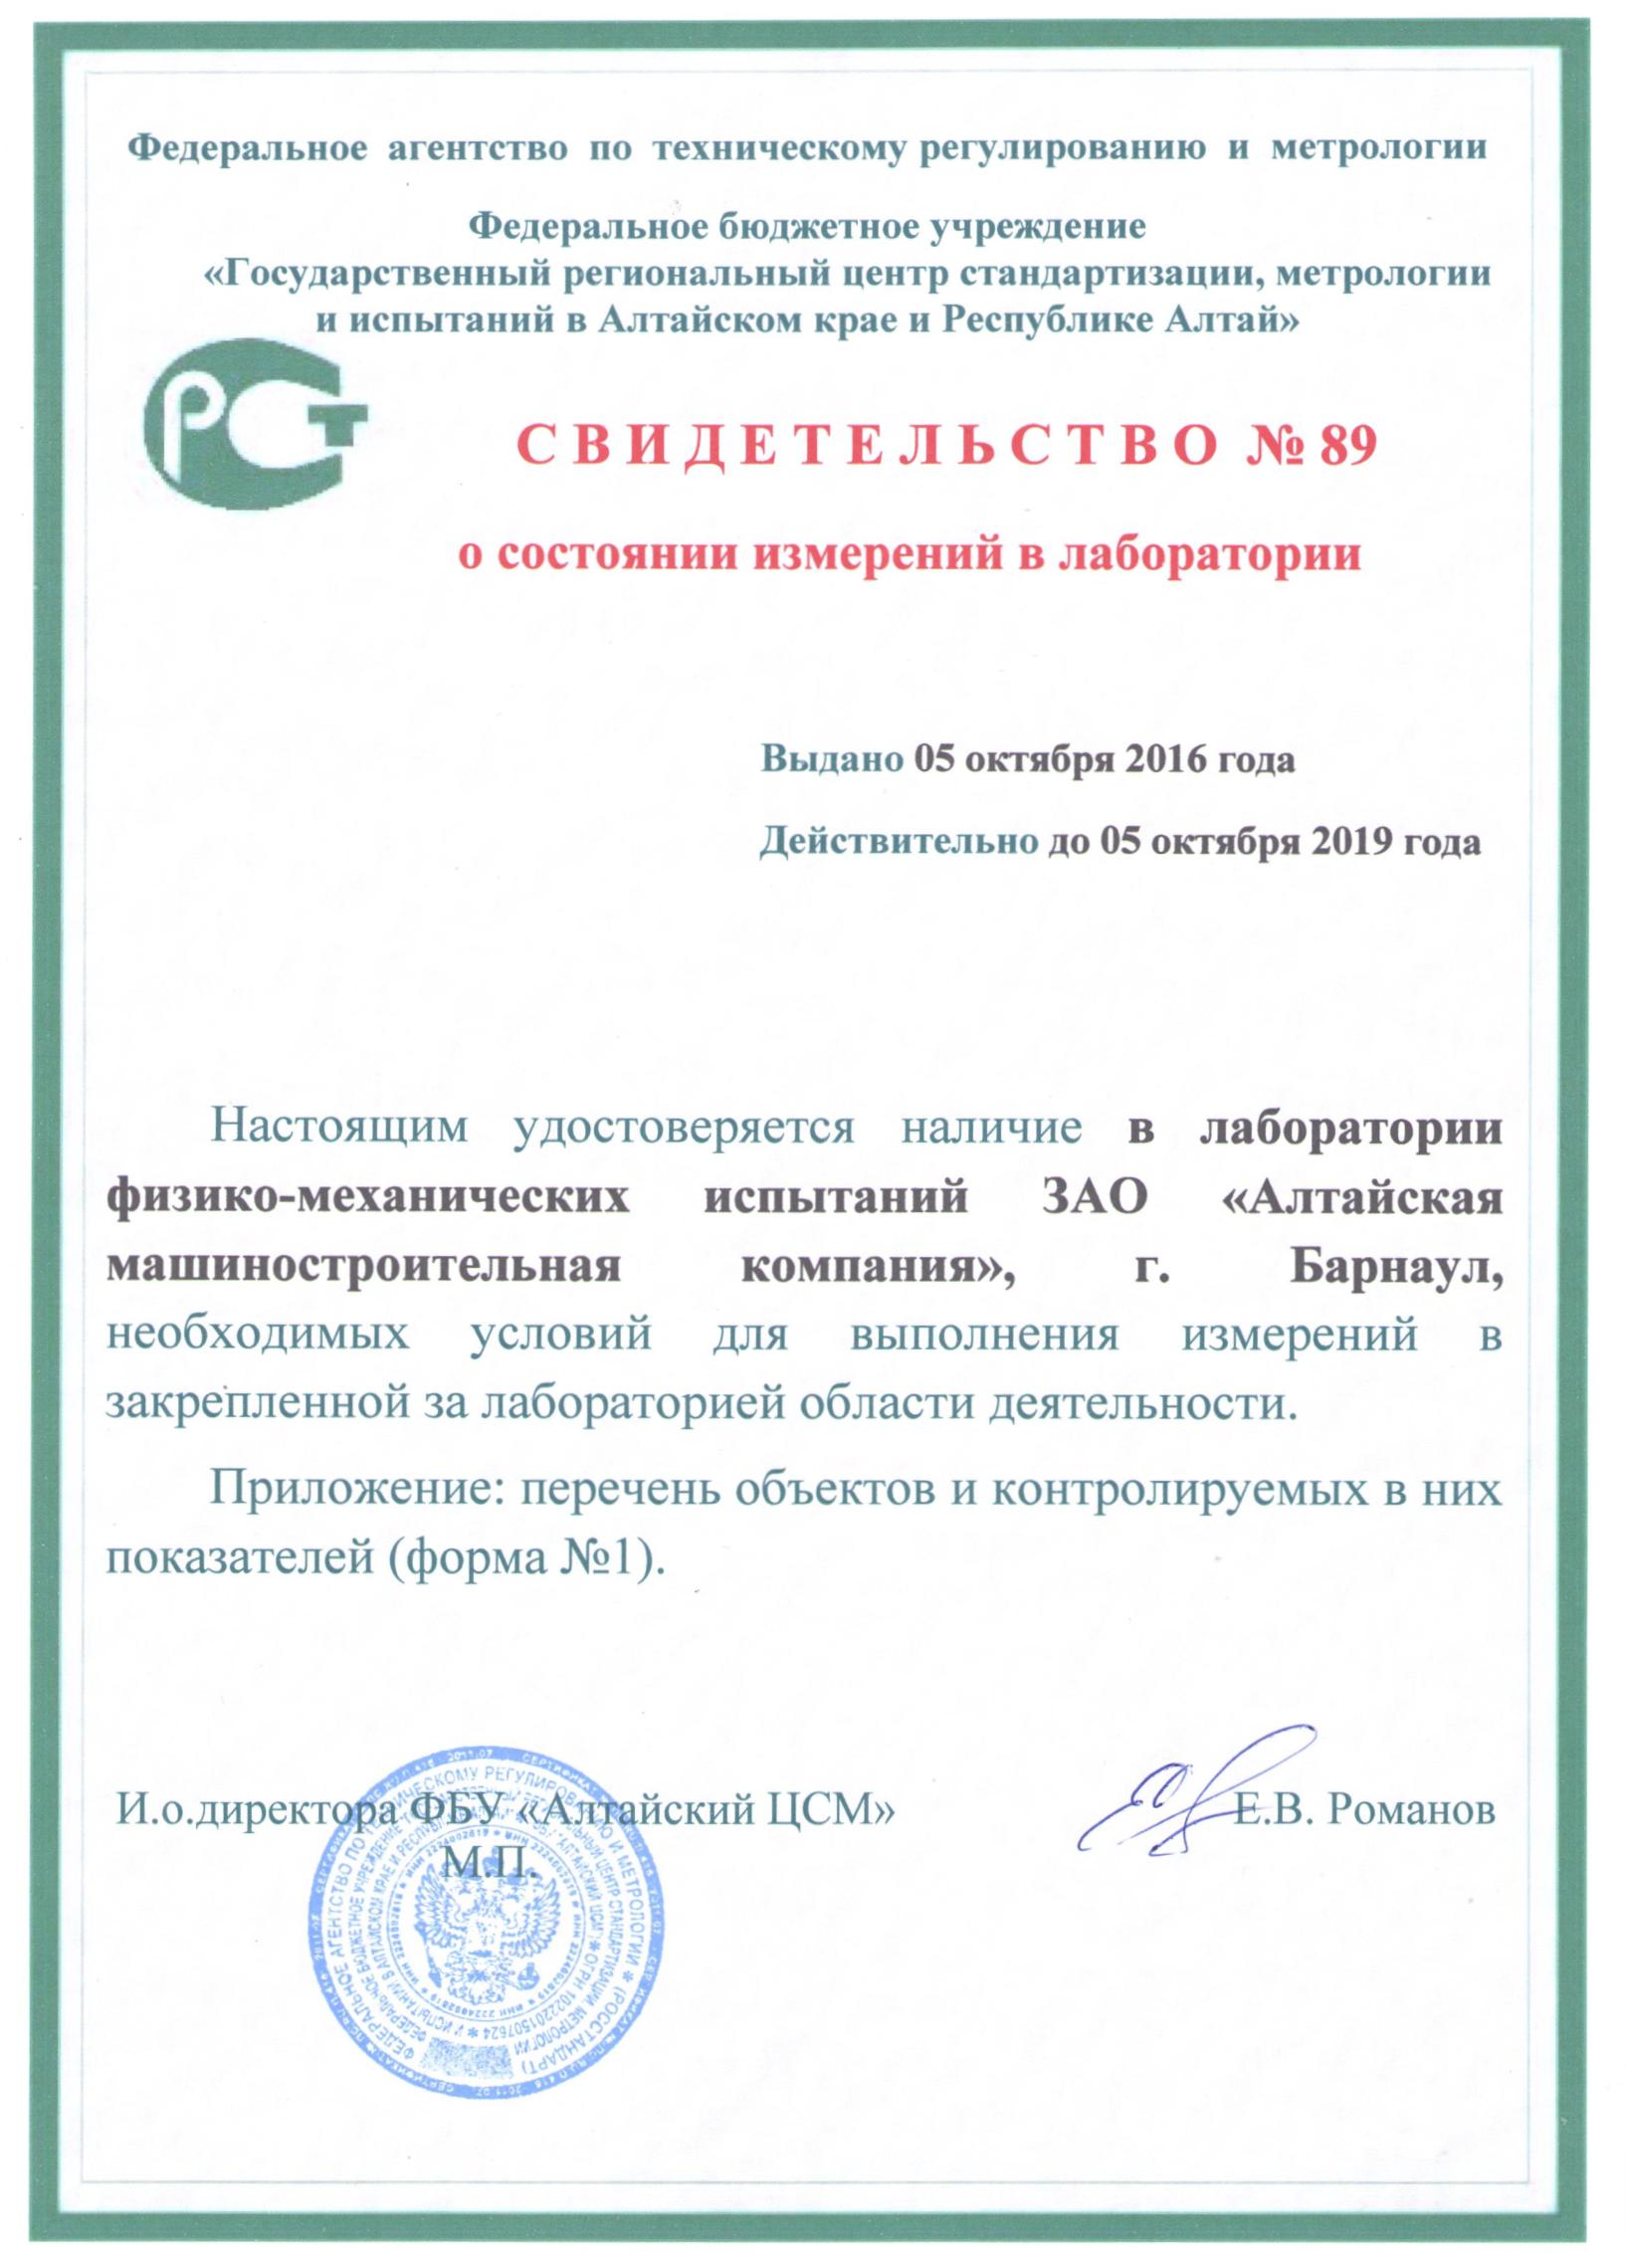 physical-mechanical laboratory certificate| picture